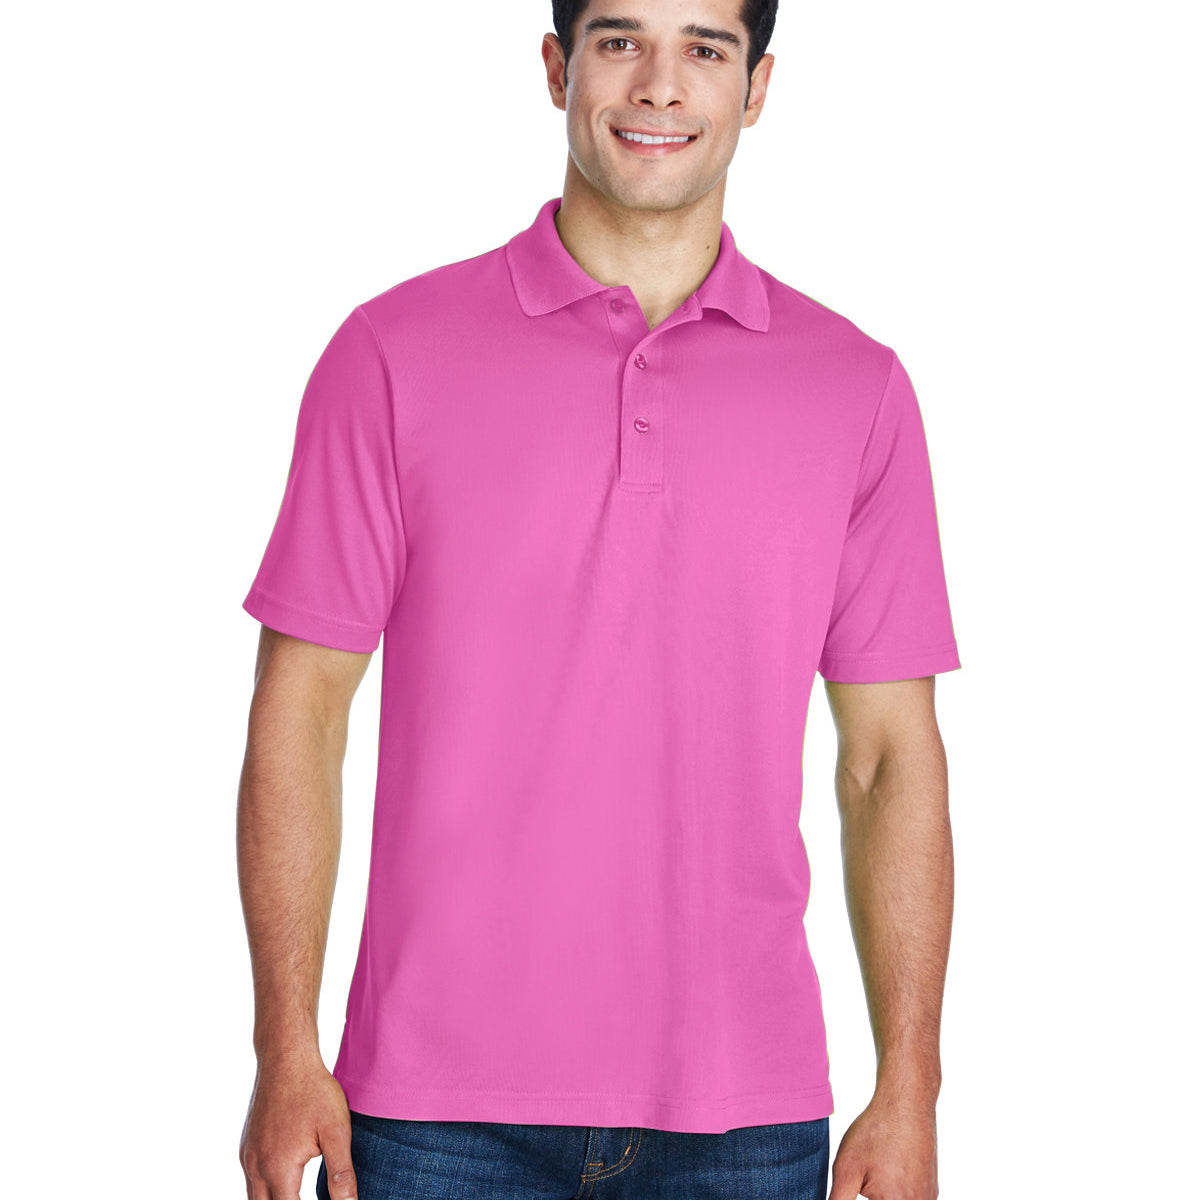 88181-CORE365-MP-CHARITYPINK-5XL